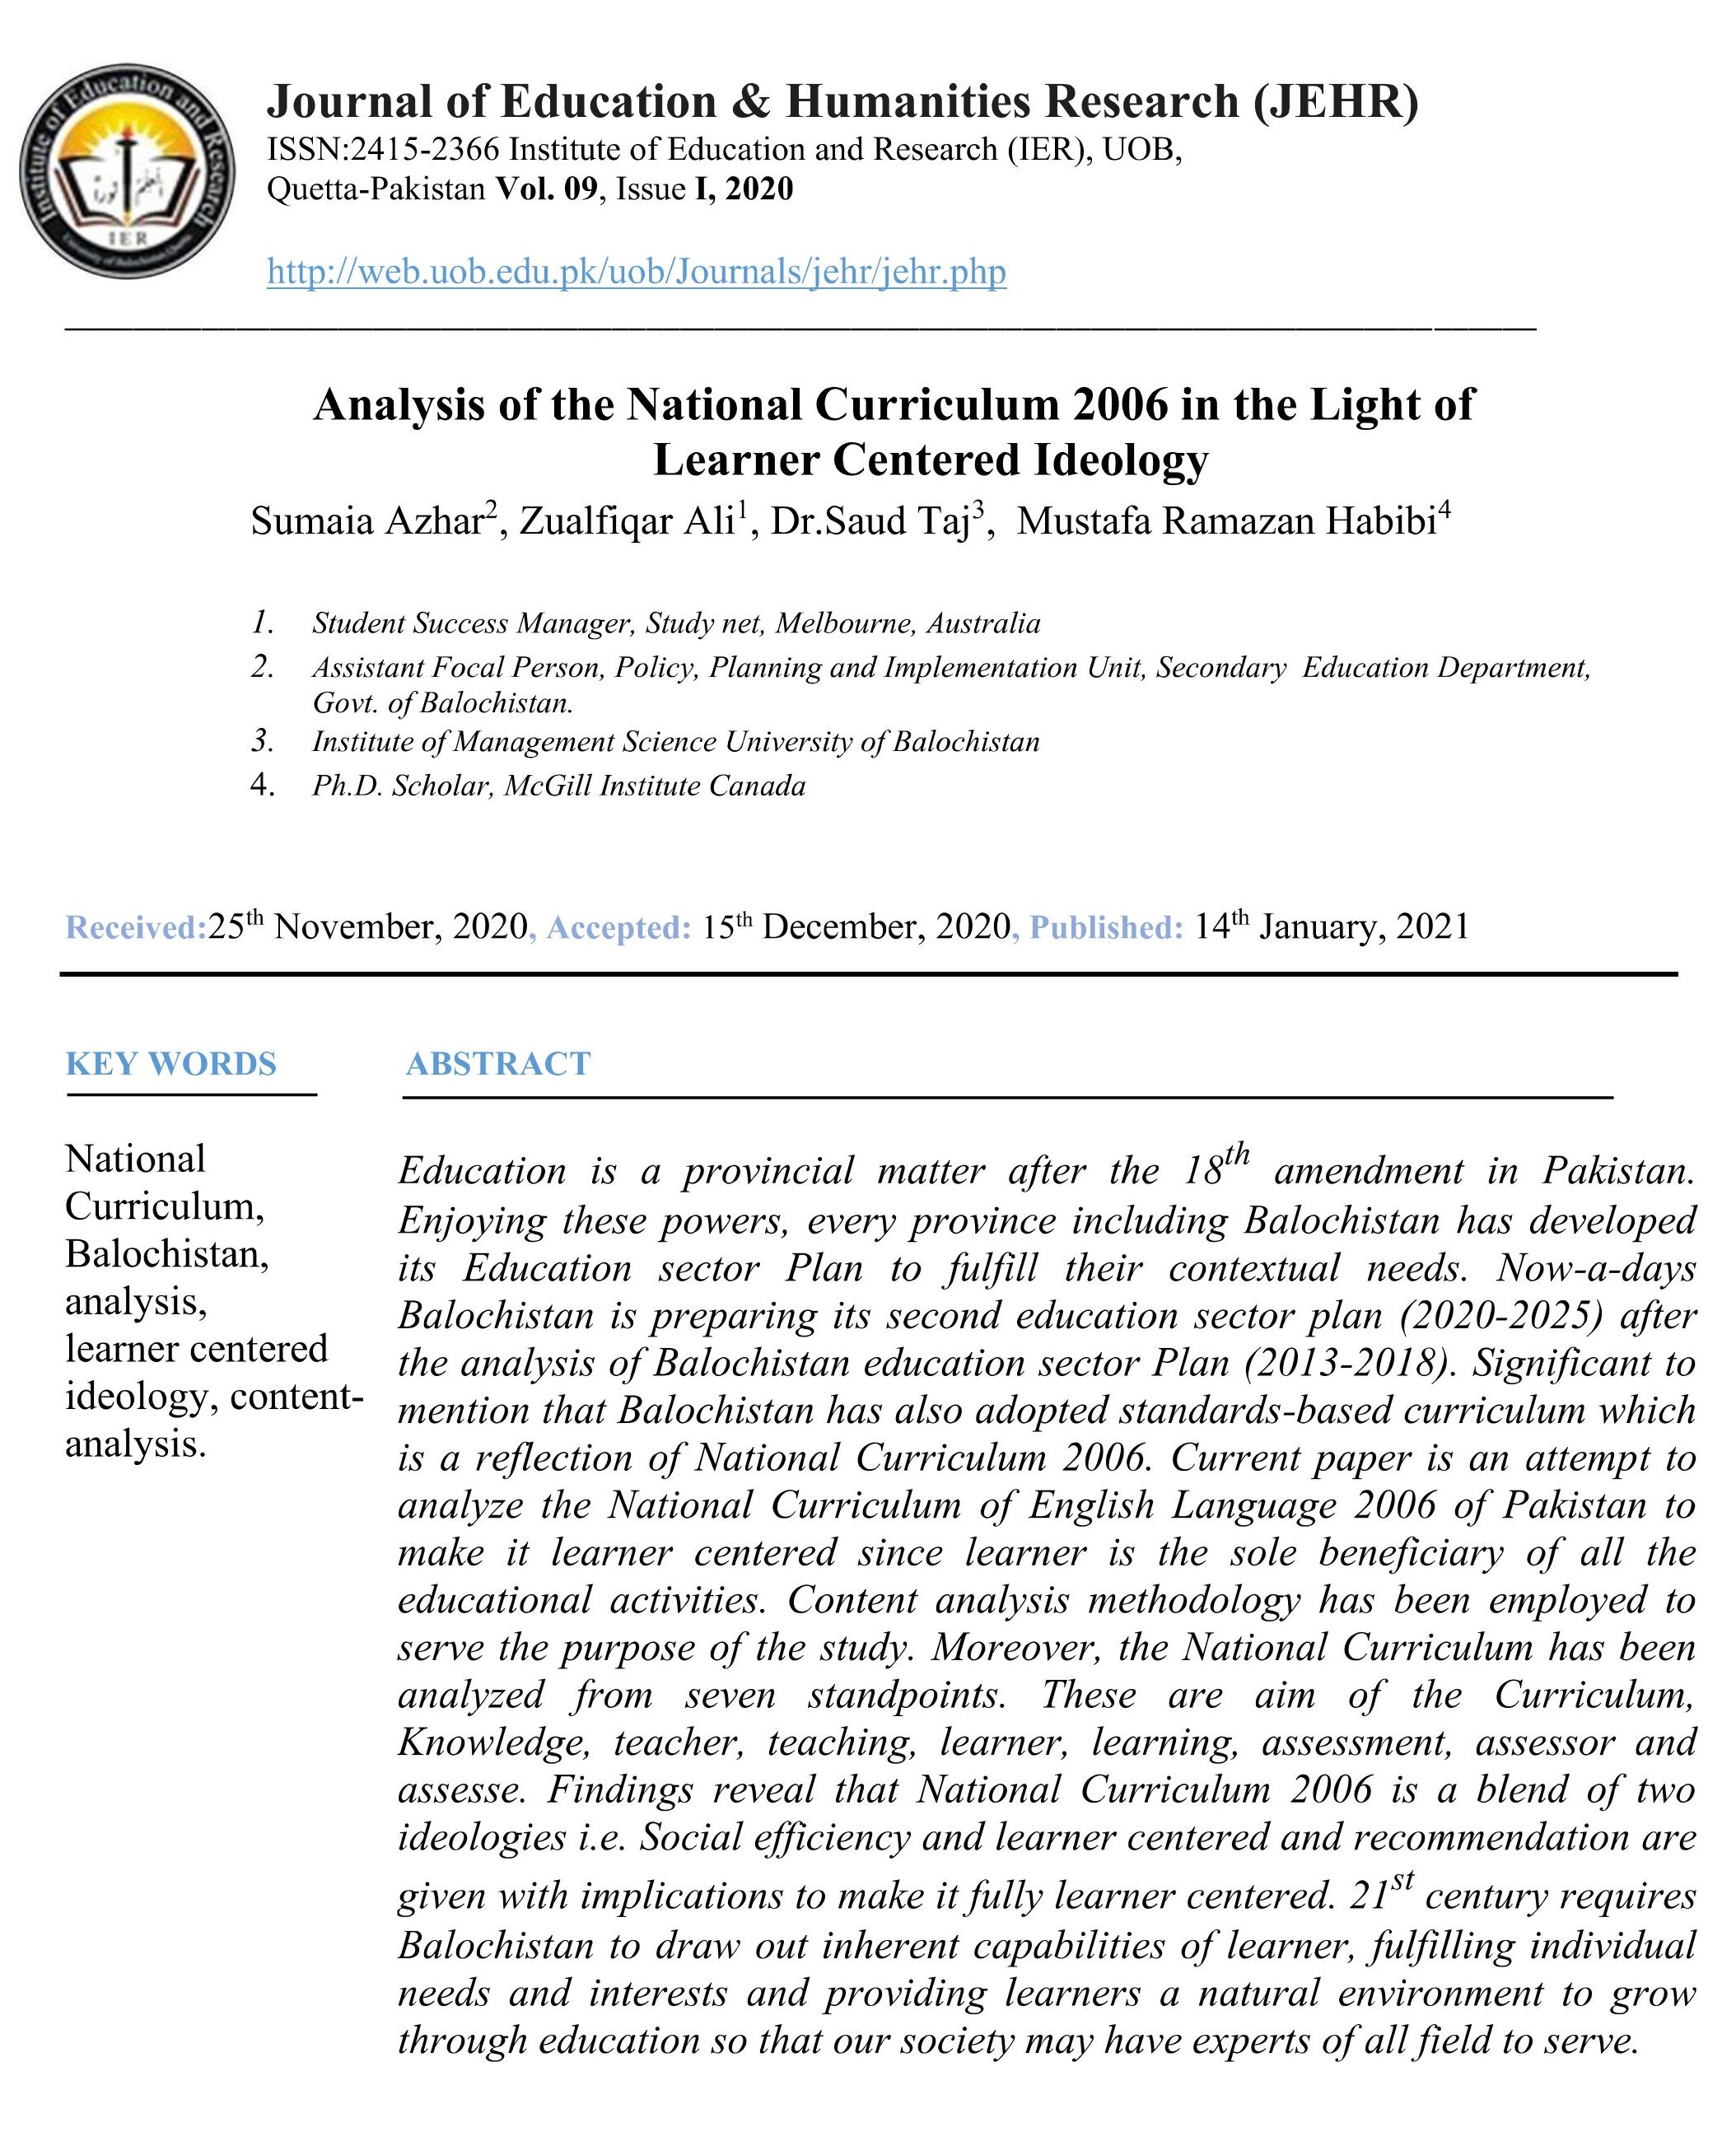 Analysis of the National Curriculum 2006 in the Light of Learner Centered Ideology